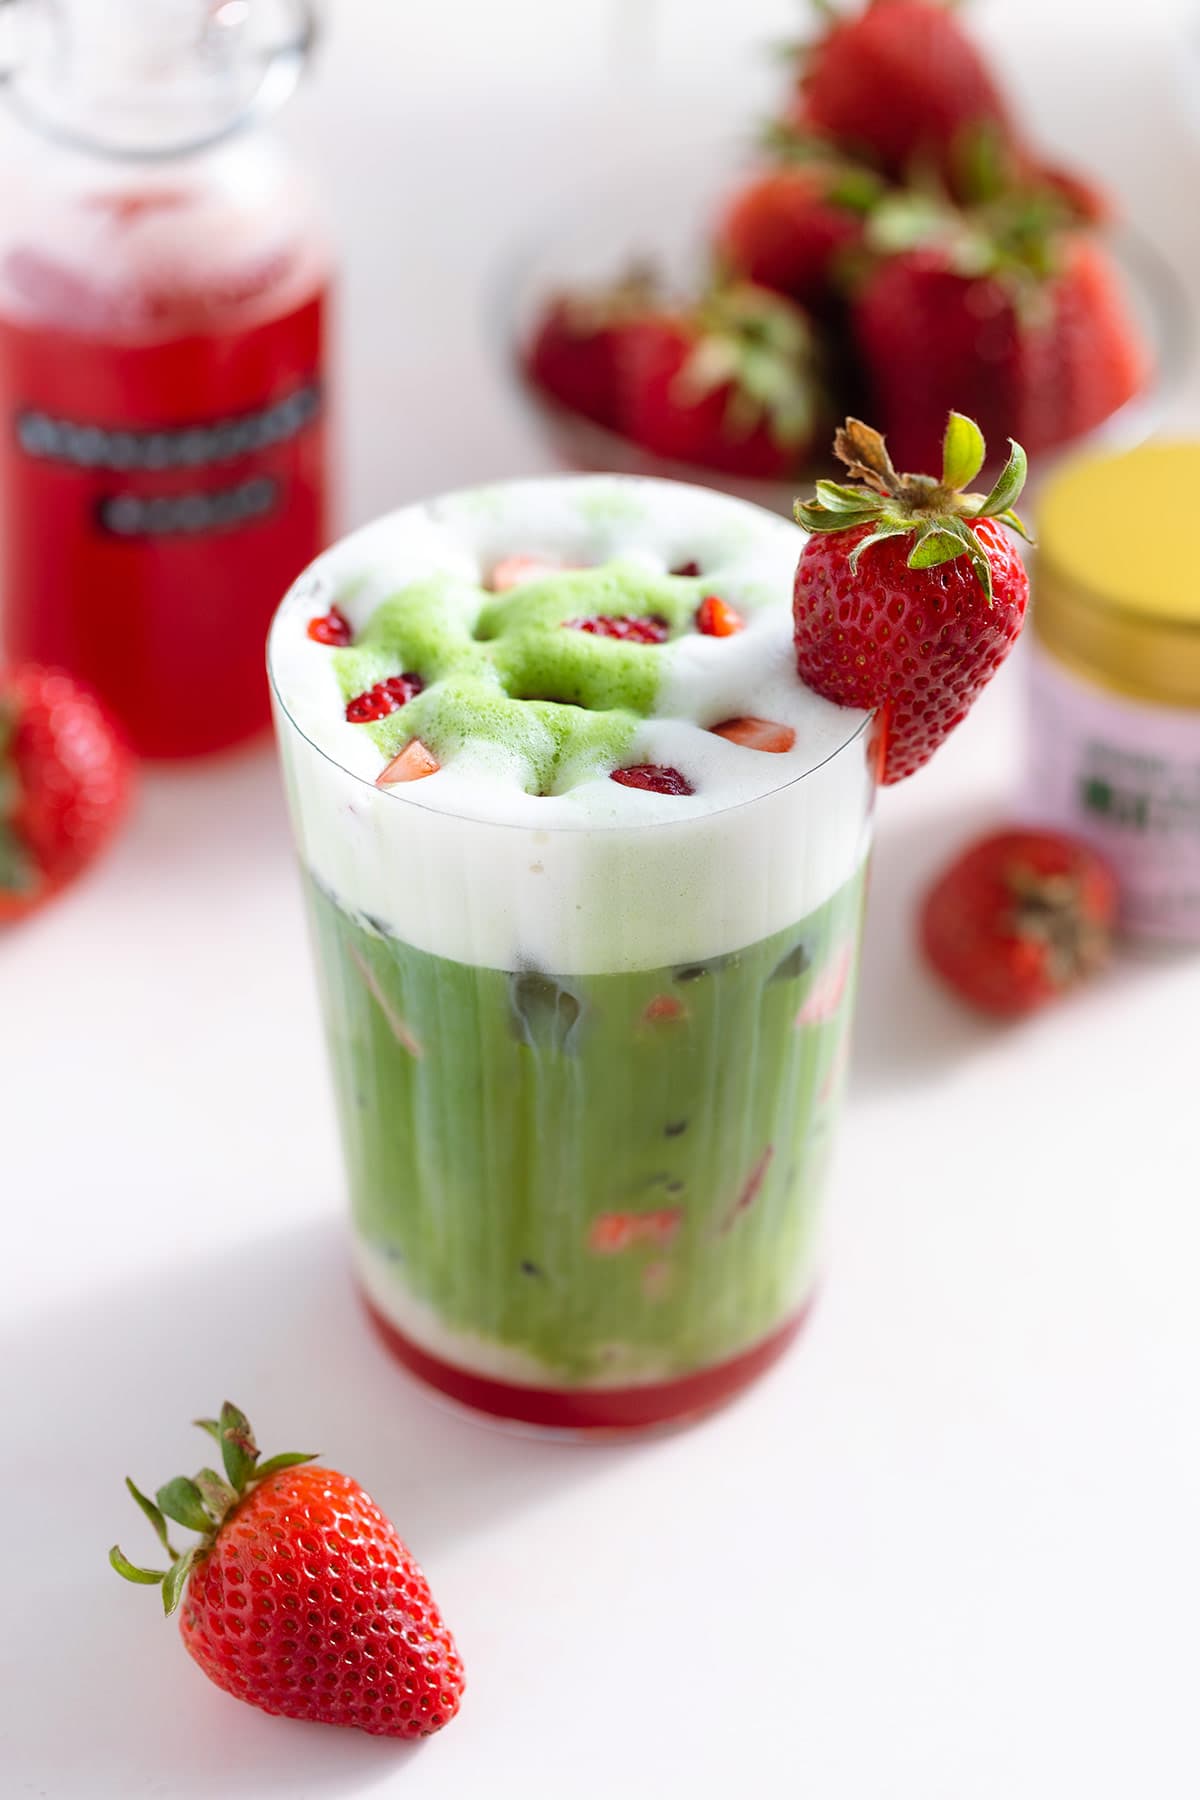 A tall glass with a matcha latte with a layer of frothy milk on the top and a layer of strawberry syrup on the bottom of the glass garnished with more chopped strawberries on top.